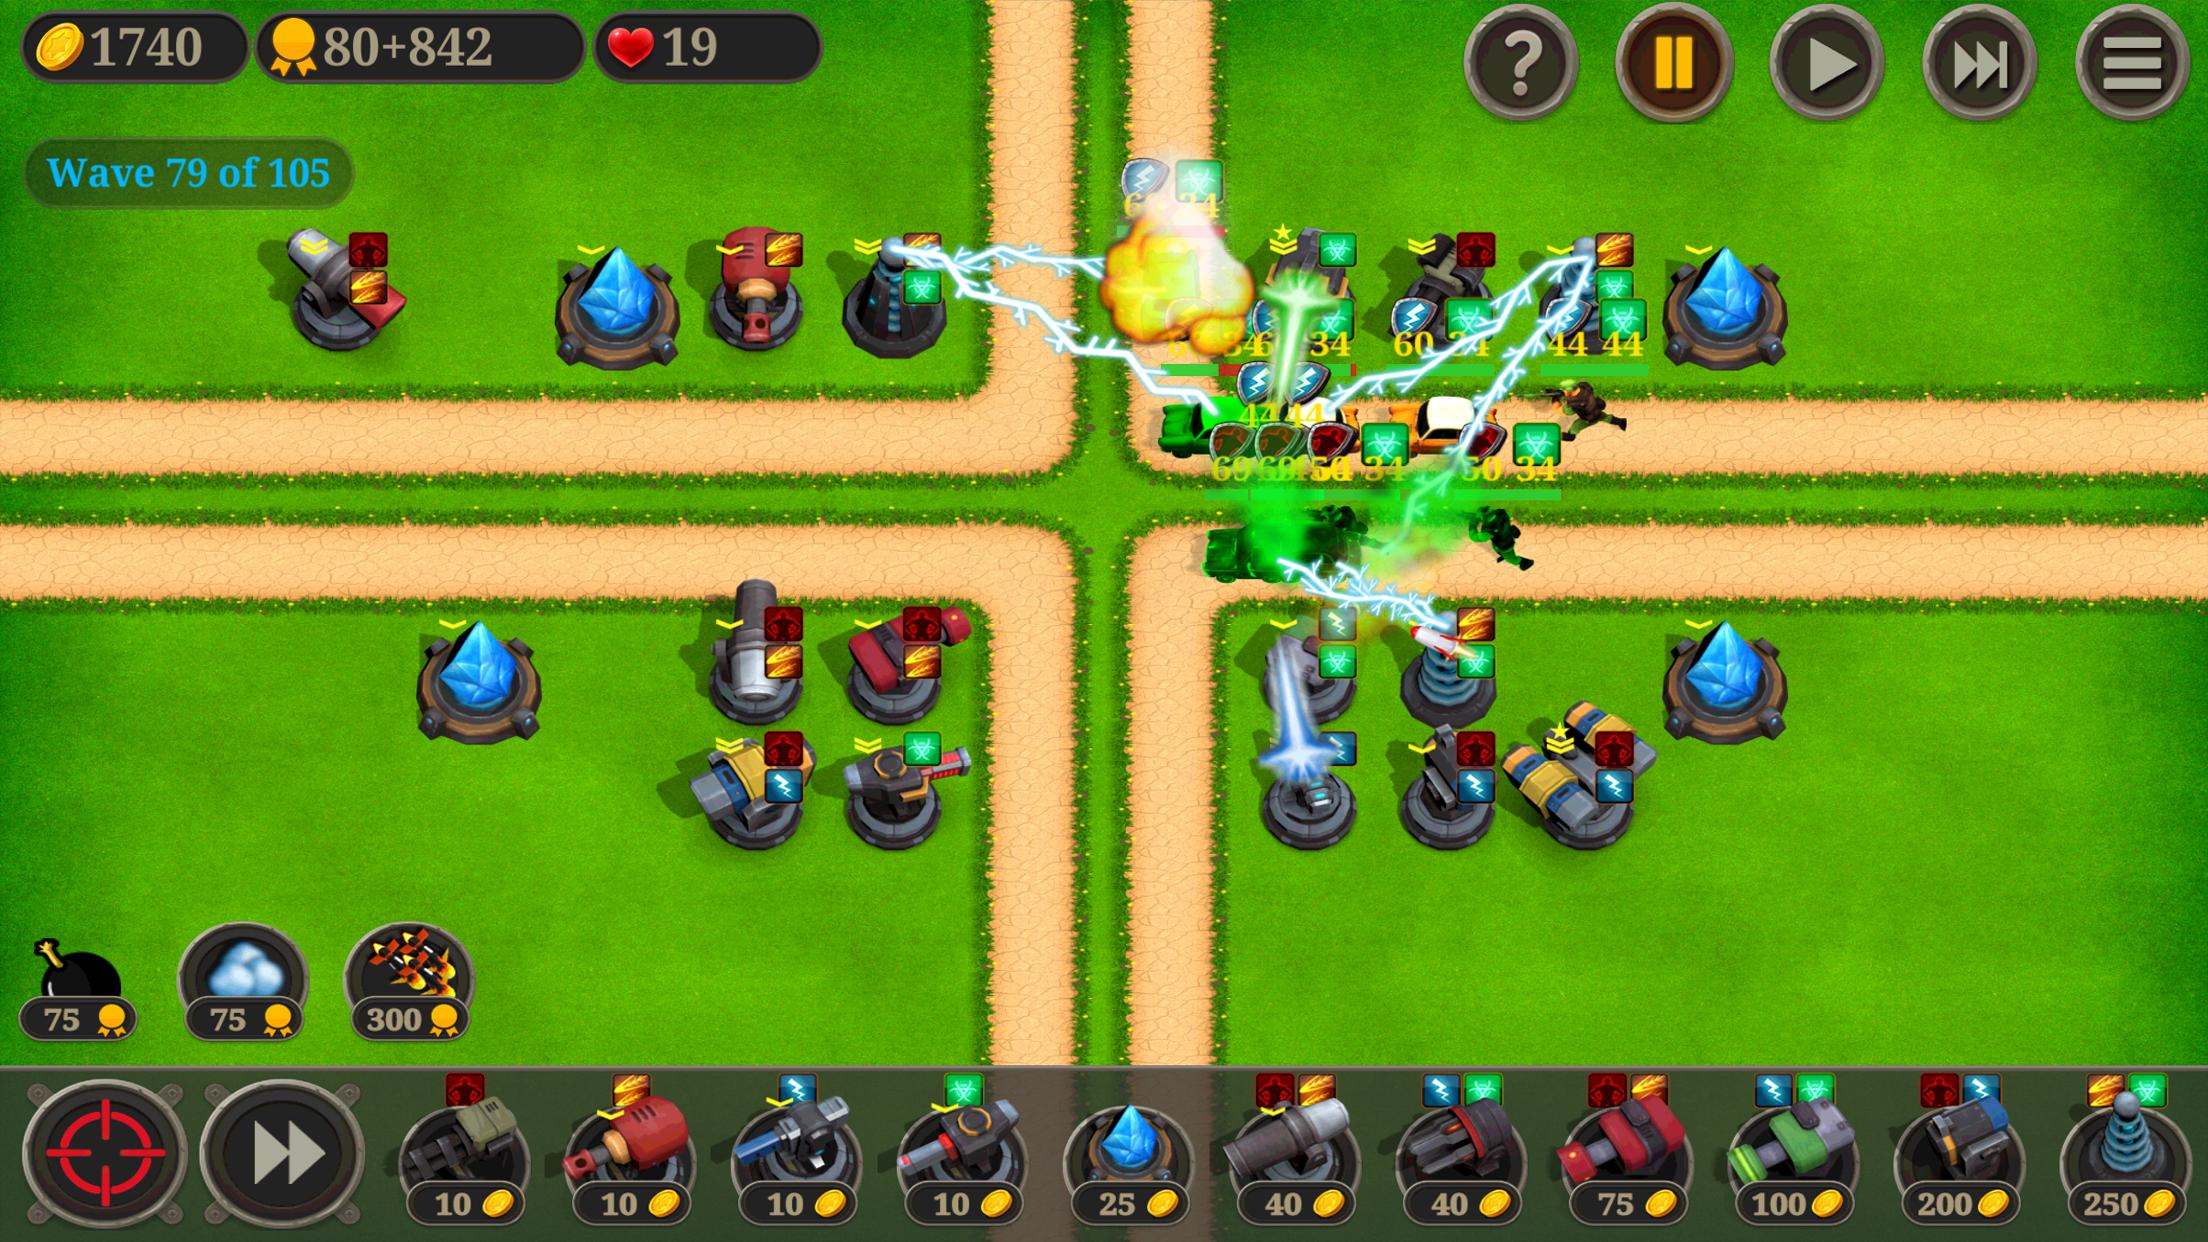 Tyrant of the tower defense. Карта Tower Defense. Tower Defense со стрелами. Tower Defense Fortress. Таблица персов Алл Стар ТОВЕР дефенс.